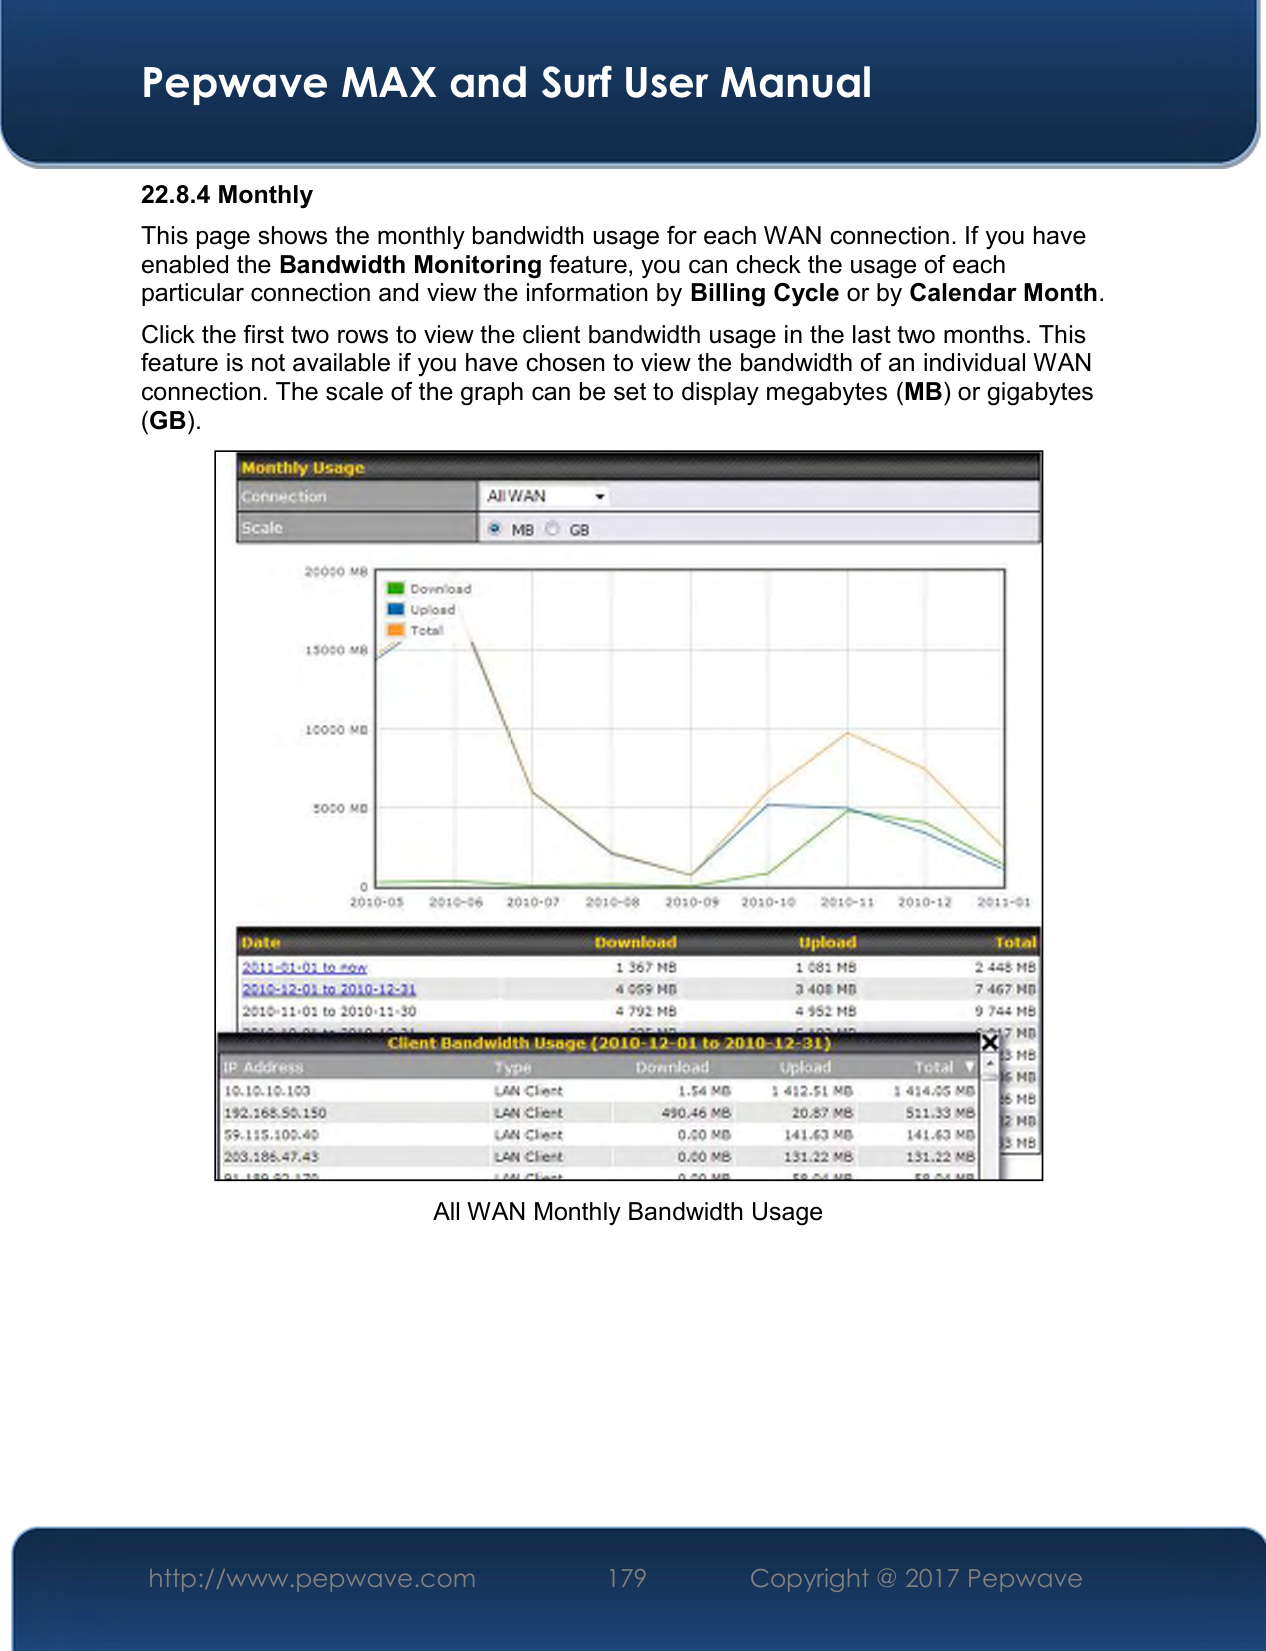  Pepwave MAX and Surf User Manual http://www.pepwave.com  179    Copyright @ 2017 Pepwave   22.8.4 Monthly This page shows the monthly bandwidth usage for each WAN connection. If you have enabled the Bandwidth Monitoring feature, you can check the usage of each particular connection and view the information by Billing Cycle or by Calendar Month. Click the first two rows to view the client bandwidth usage in the last two months. This feature is not available if you have chosen to view the bandwidth of an individual WAN connection. The scale of the graph can be set to display megabytes (MB) or gigabytes (GB).  All WAN Monthly Bandwidth Usage 